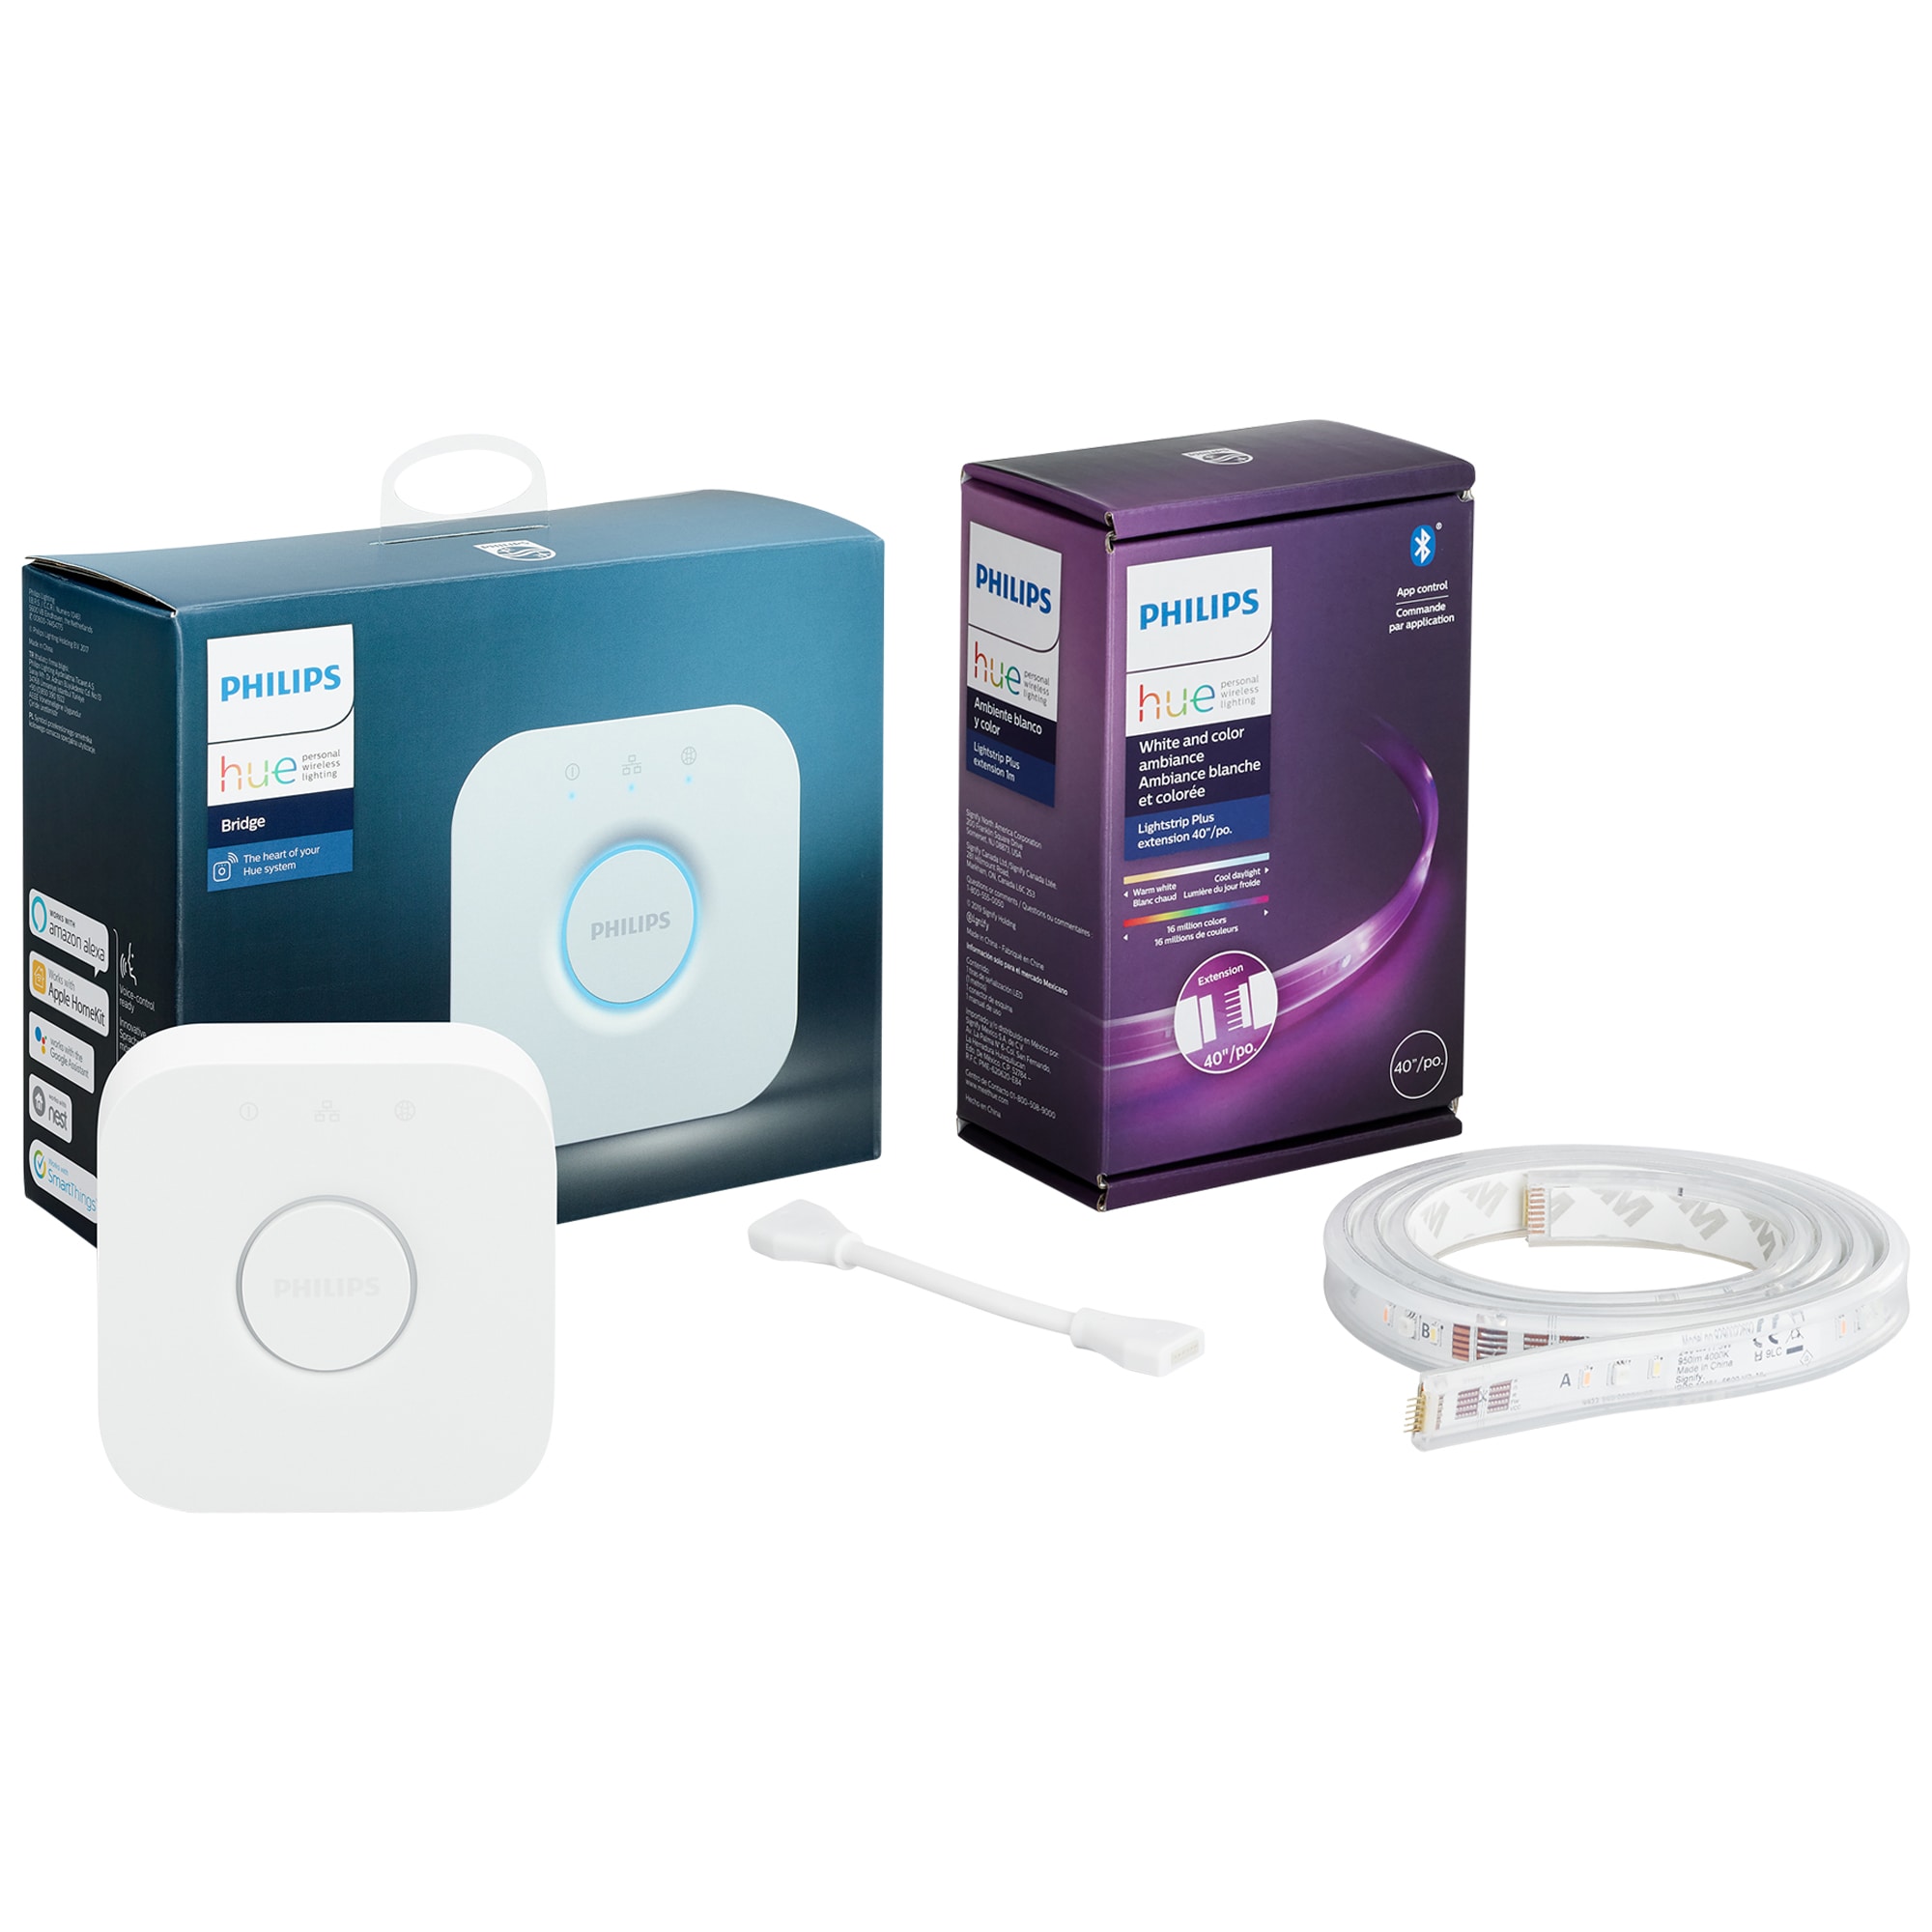 Philips Hue Bridge 2nd Gen with US plug and ethernet 458471 - NO BOX  46677458478